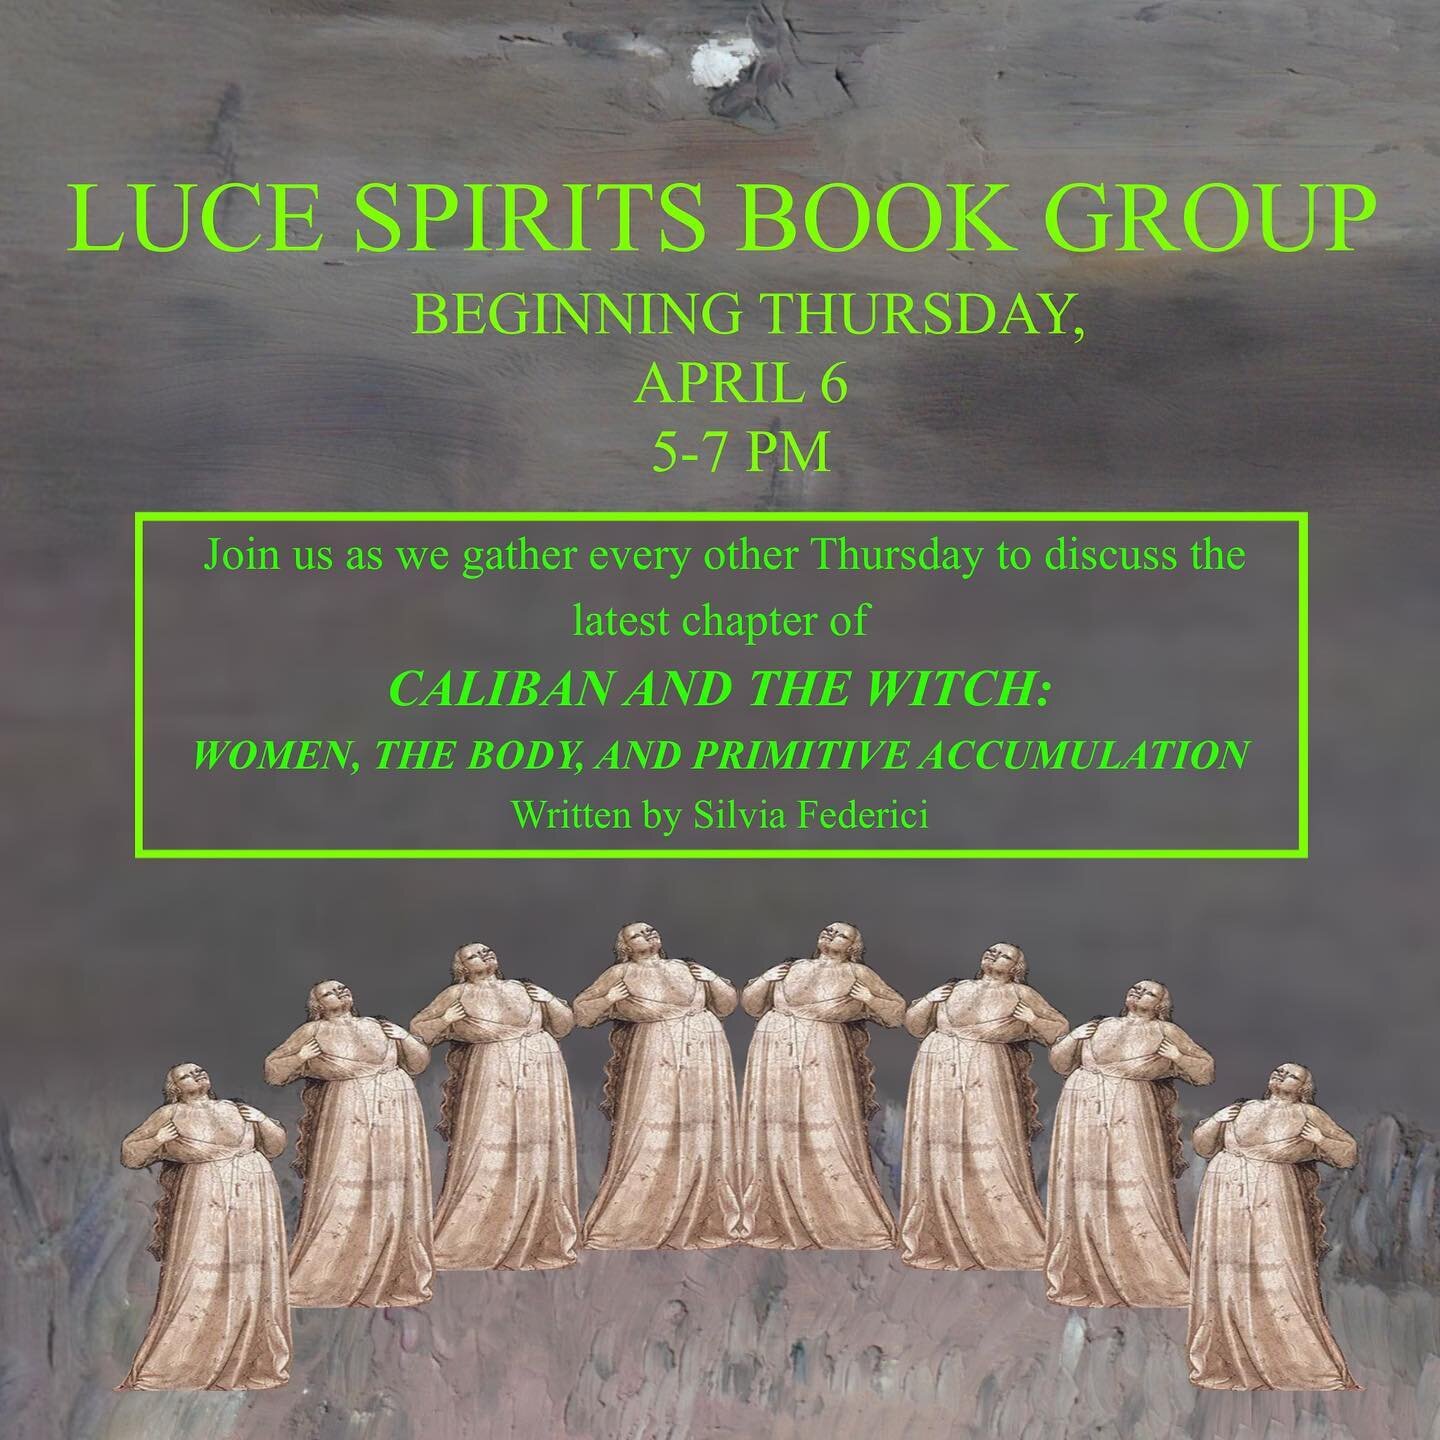 BOOK GROUP!! FIRST MEETING!! THURSDAY, 4/6, 5-7pm at Luce Spirits ☺︎︎

Come one, come all::: to our first gathering, under the light of the full moon. We will be getting to know each other and discussing the introduction to &ldquo;Caliban and the Wit